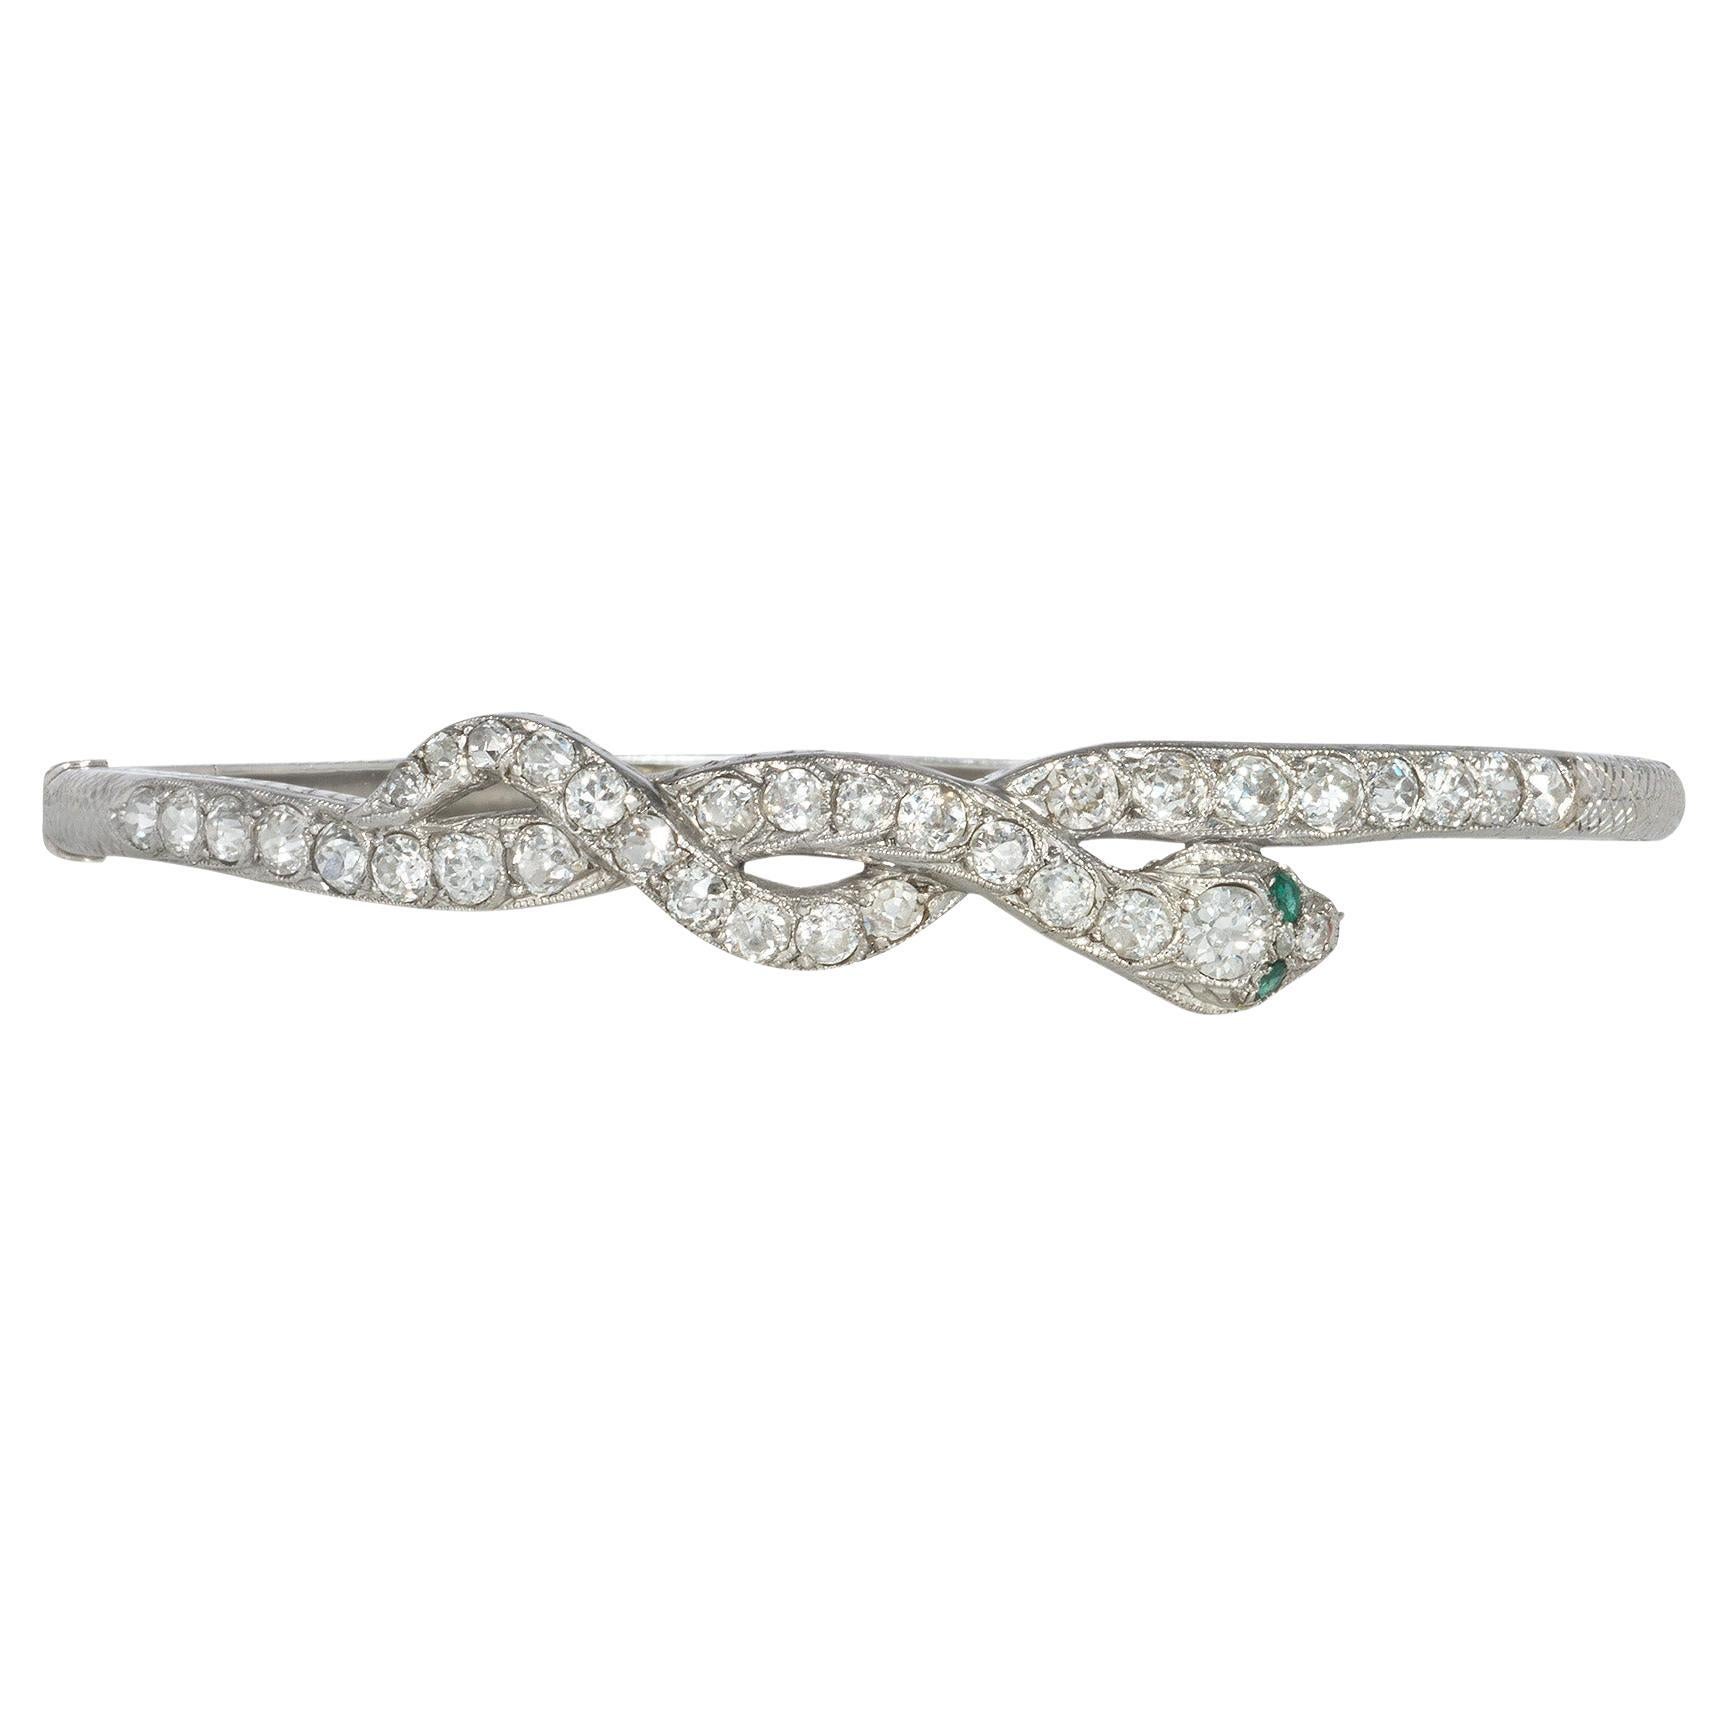 Art Deco Diamond and Platinum Entwined Snake Bracelet with Emerald Eyes For Sale